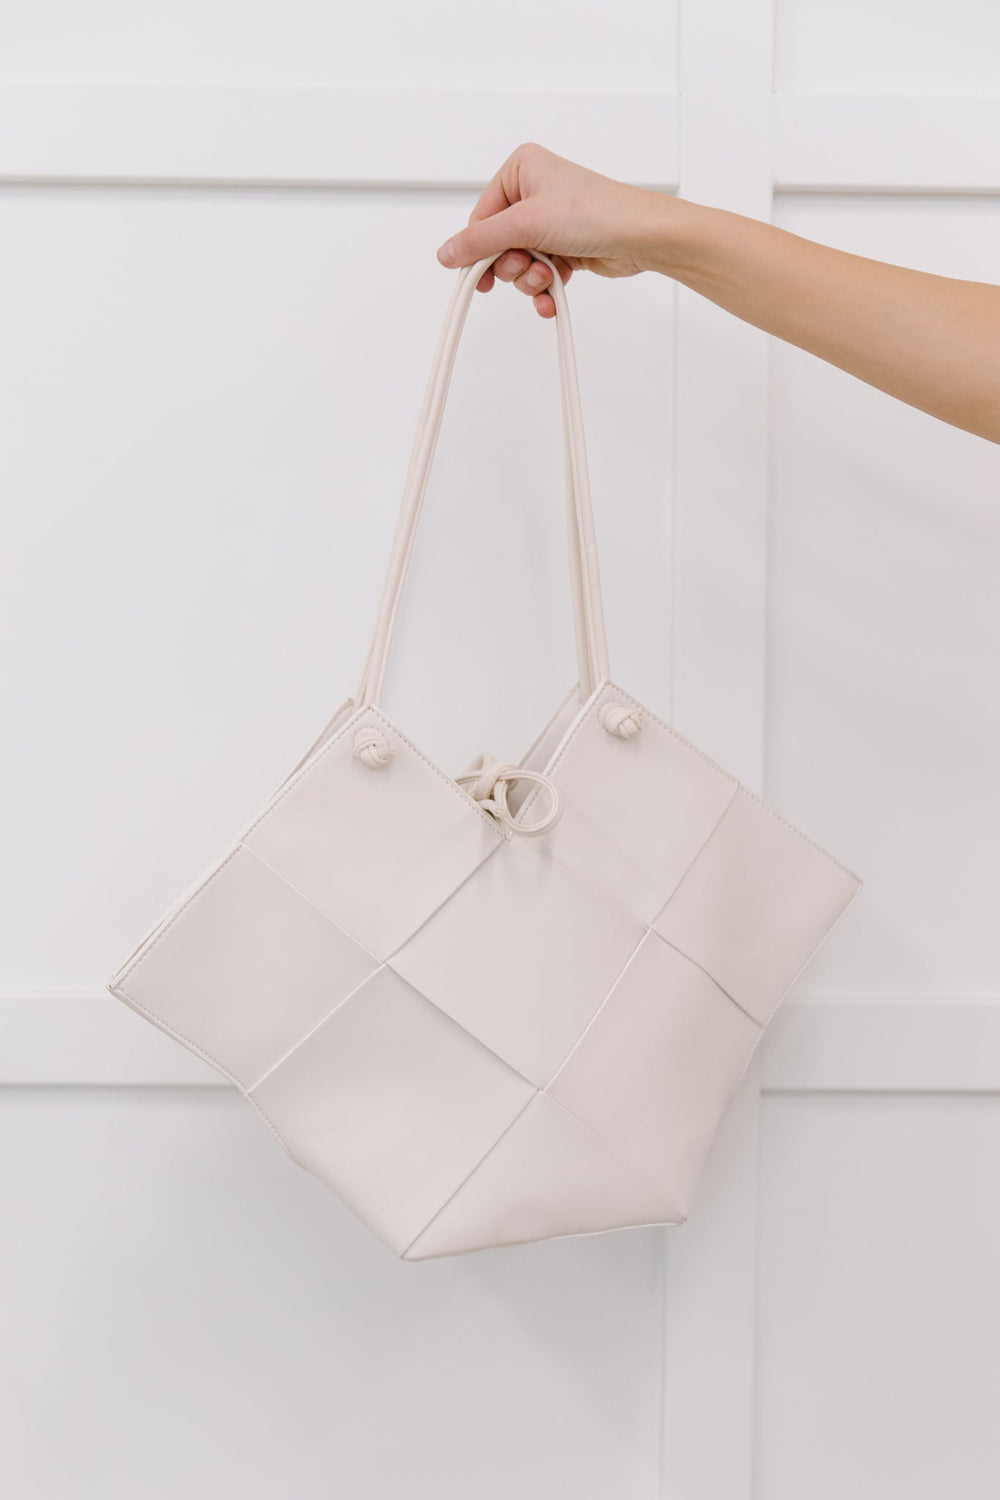 Woven Tote in White-Purses-Inspired by Justeen-Women's Clothing Boutique in Chicago, Illinois